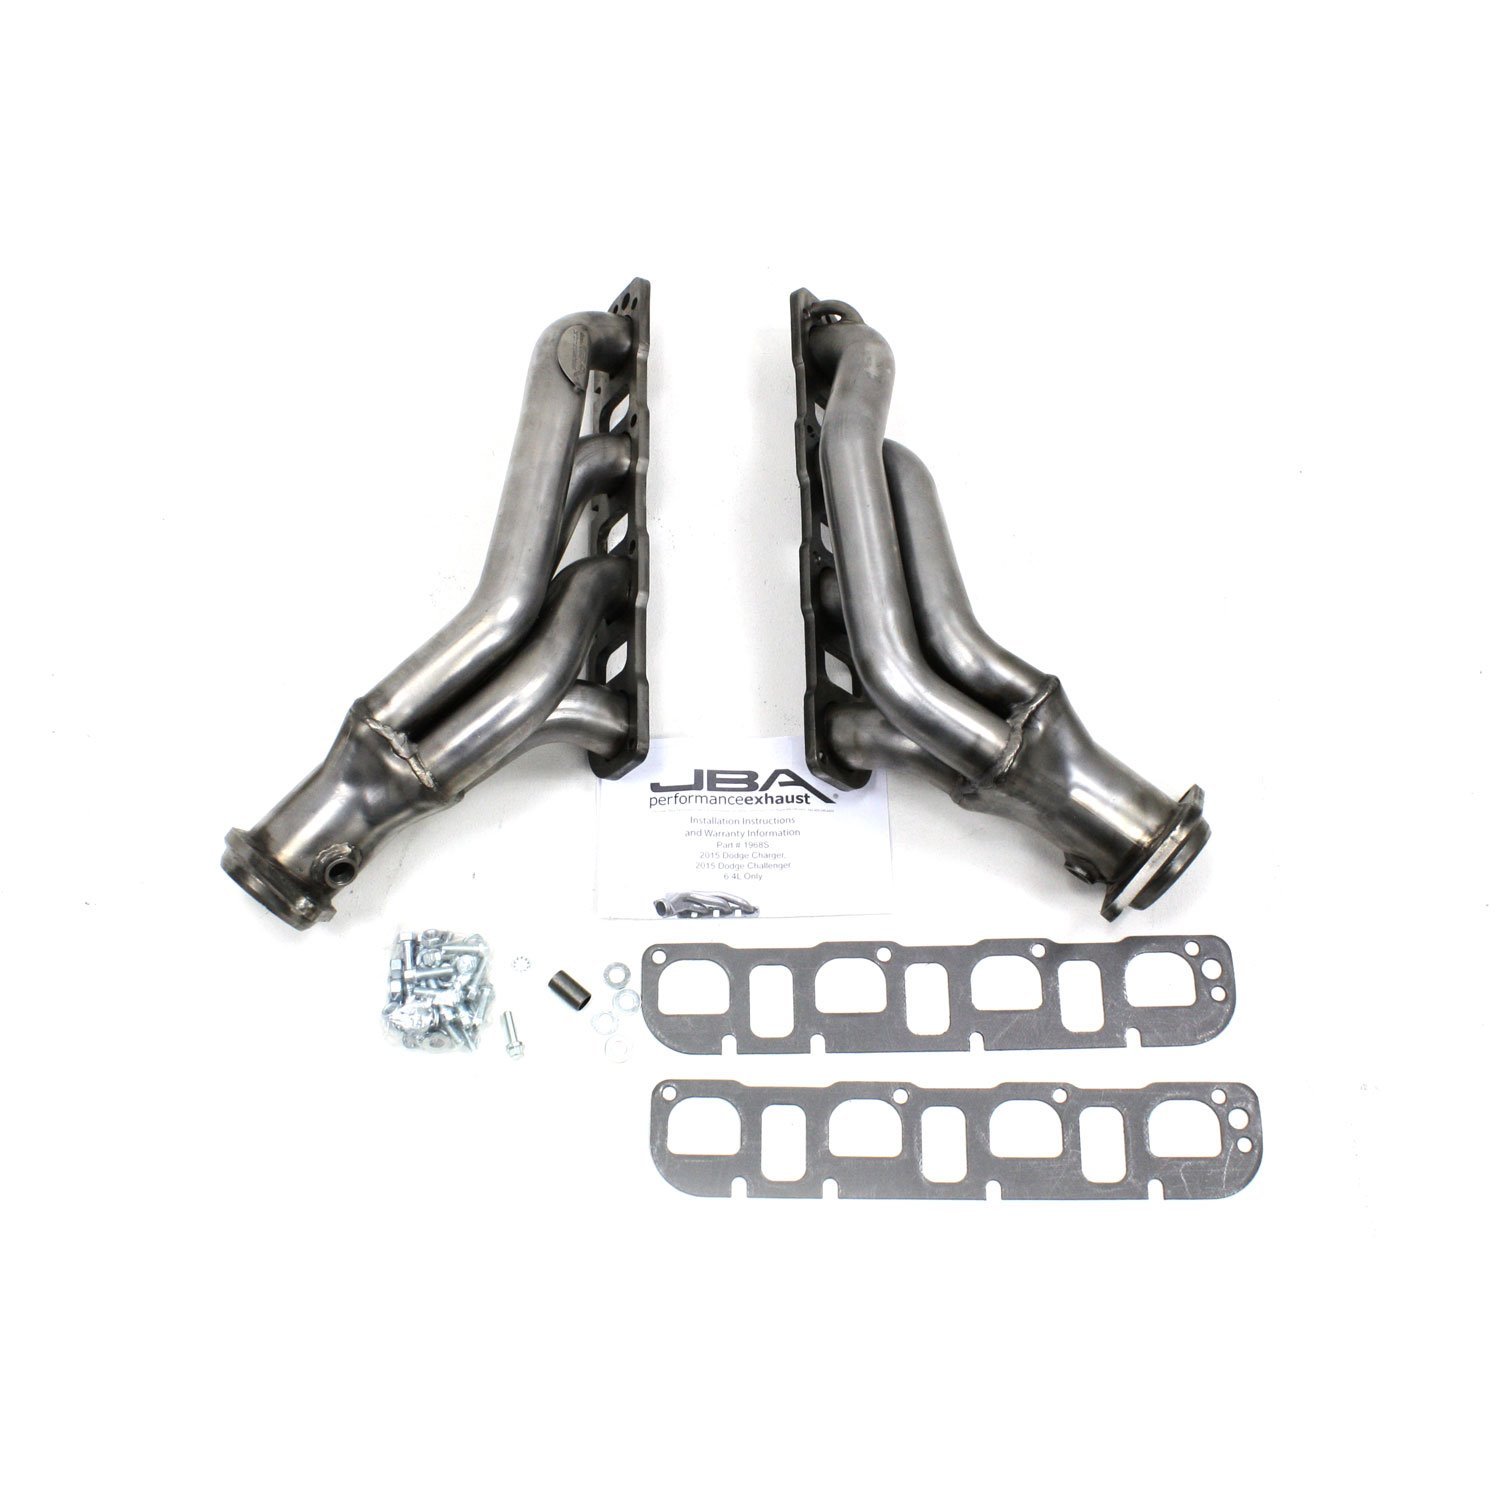 Cat4ward Shorty Headers 2015-19 Challenger/Charger